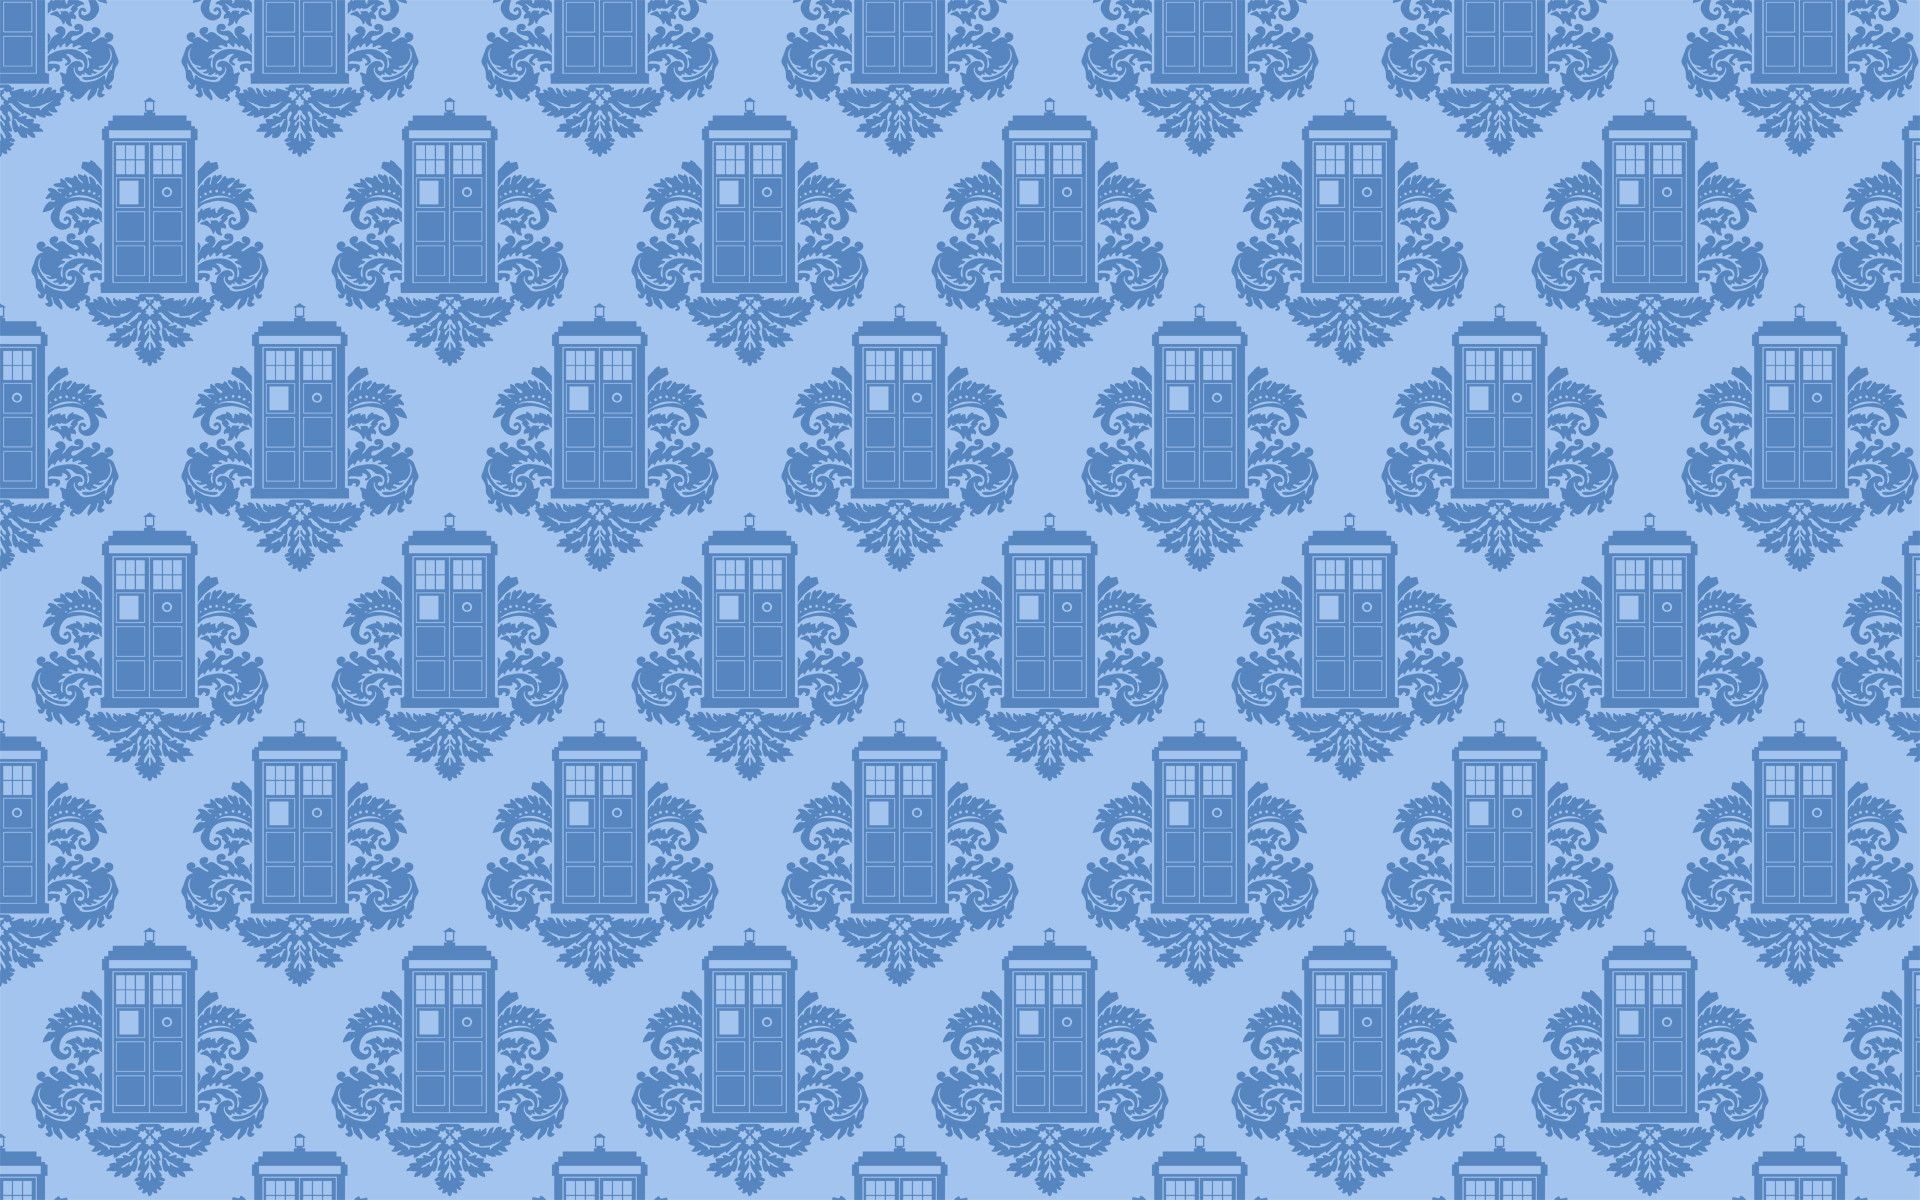 1920x1200 Dr Who Desktop Wallpapers Wallpapers) – Adorable Wallpapers